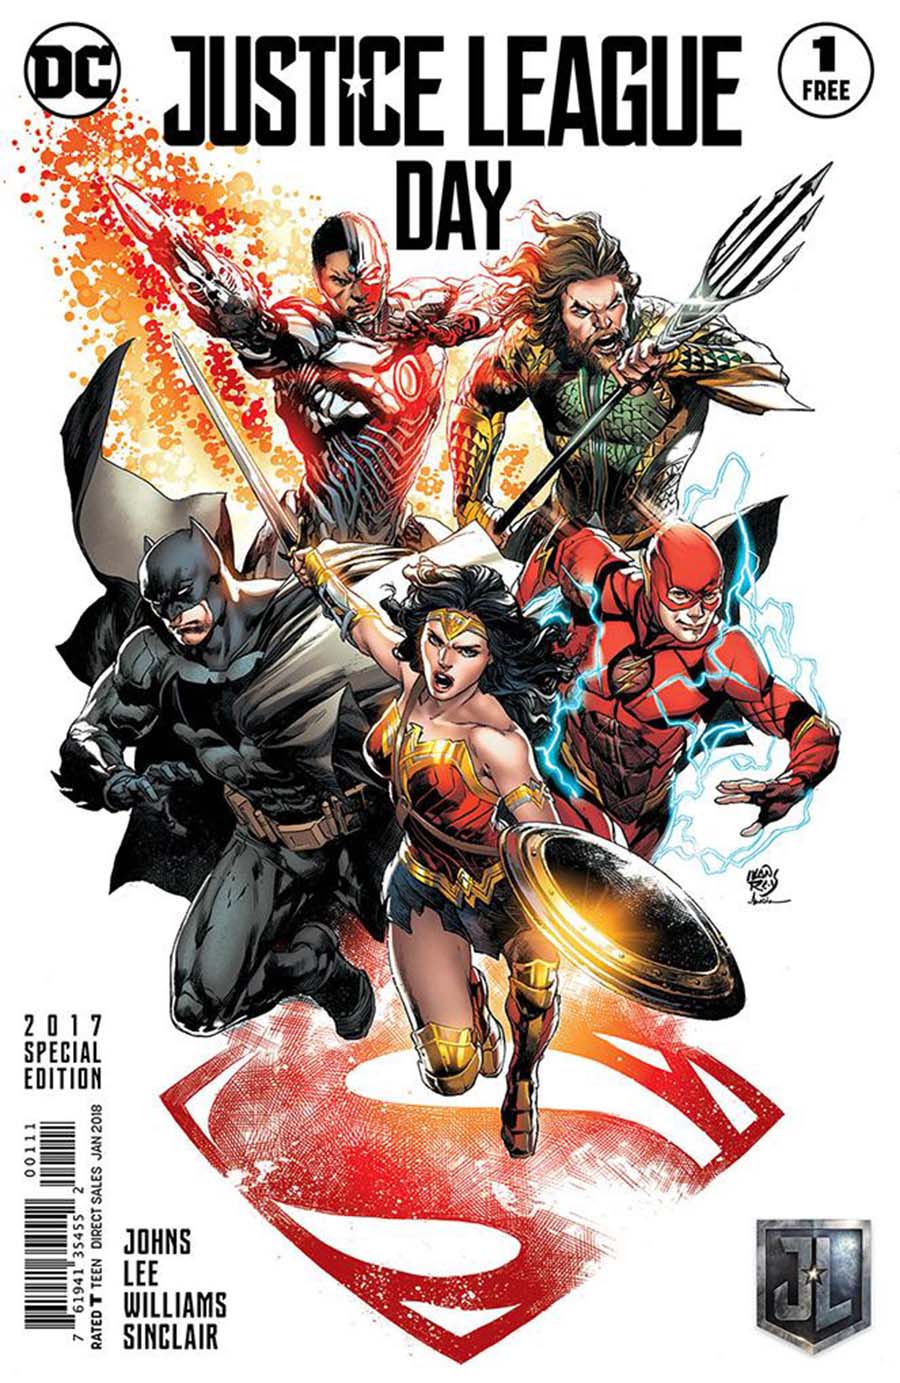 Justice League Day #1 Special Edition